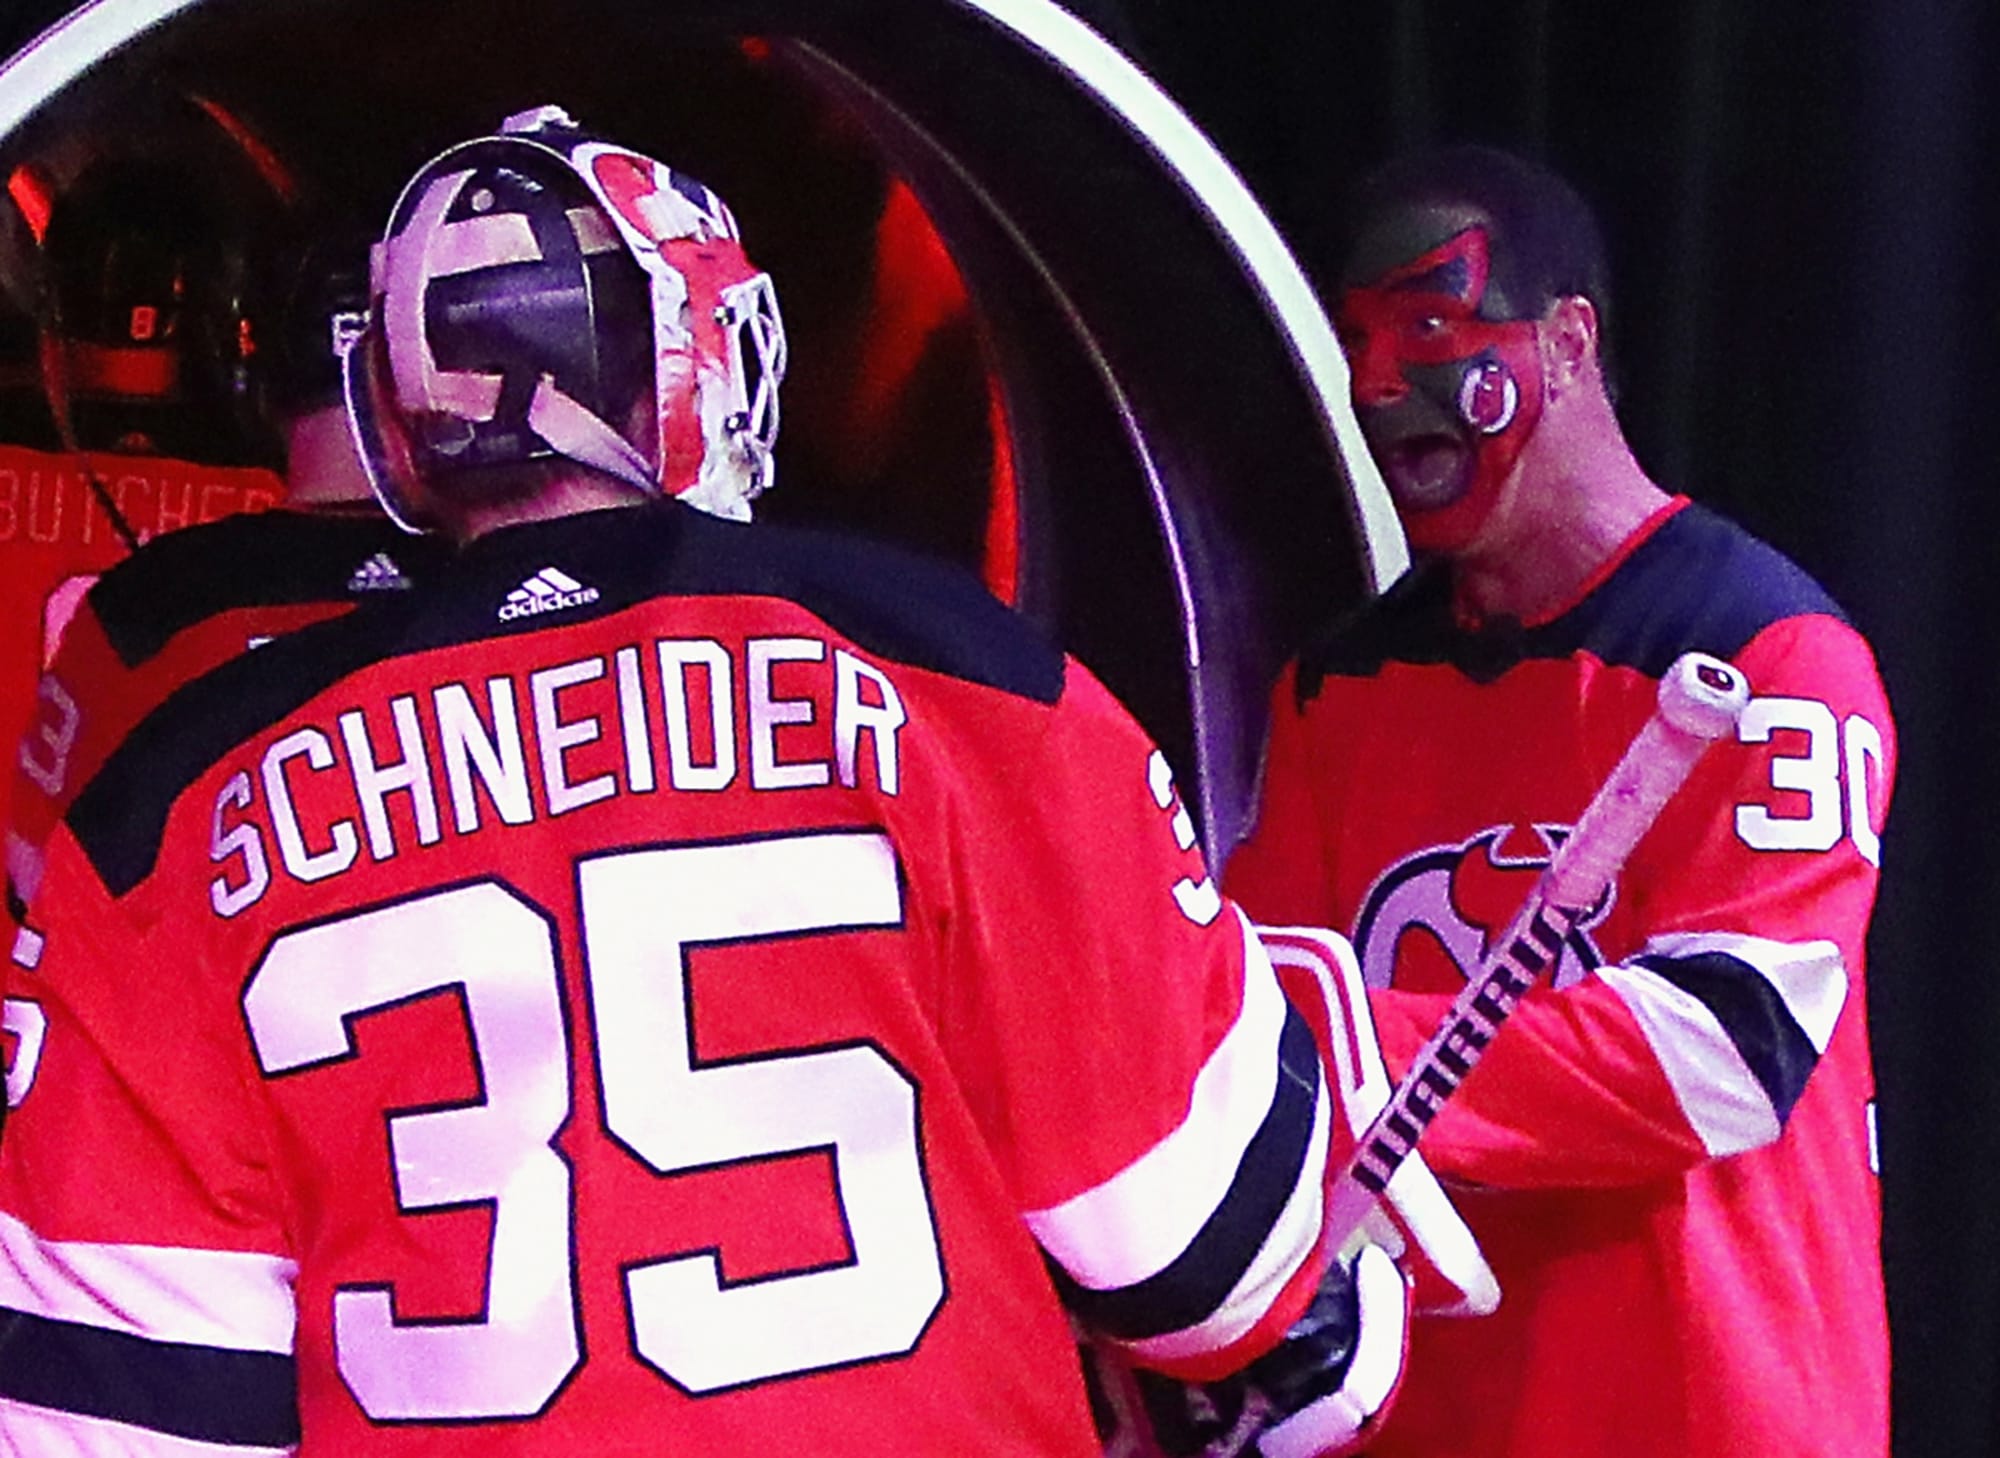 PHOTO: Cory Schneider's mask complements Millionaires jersey 